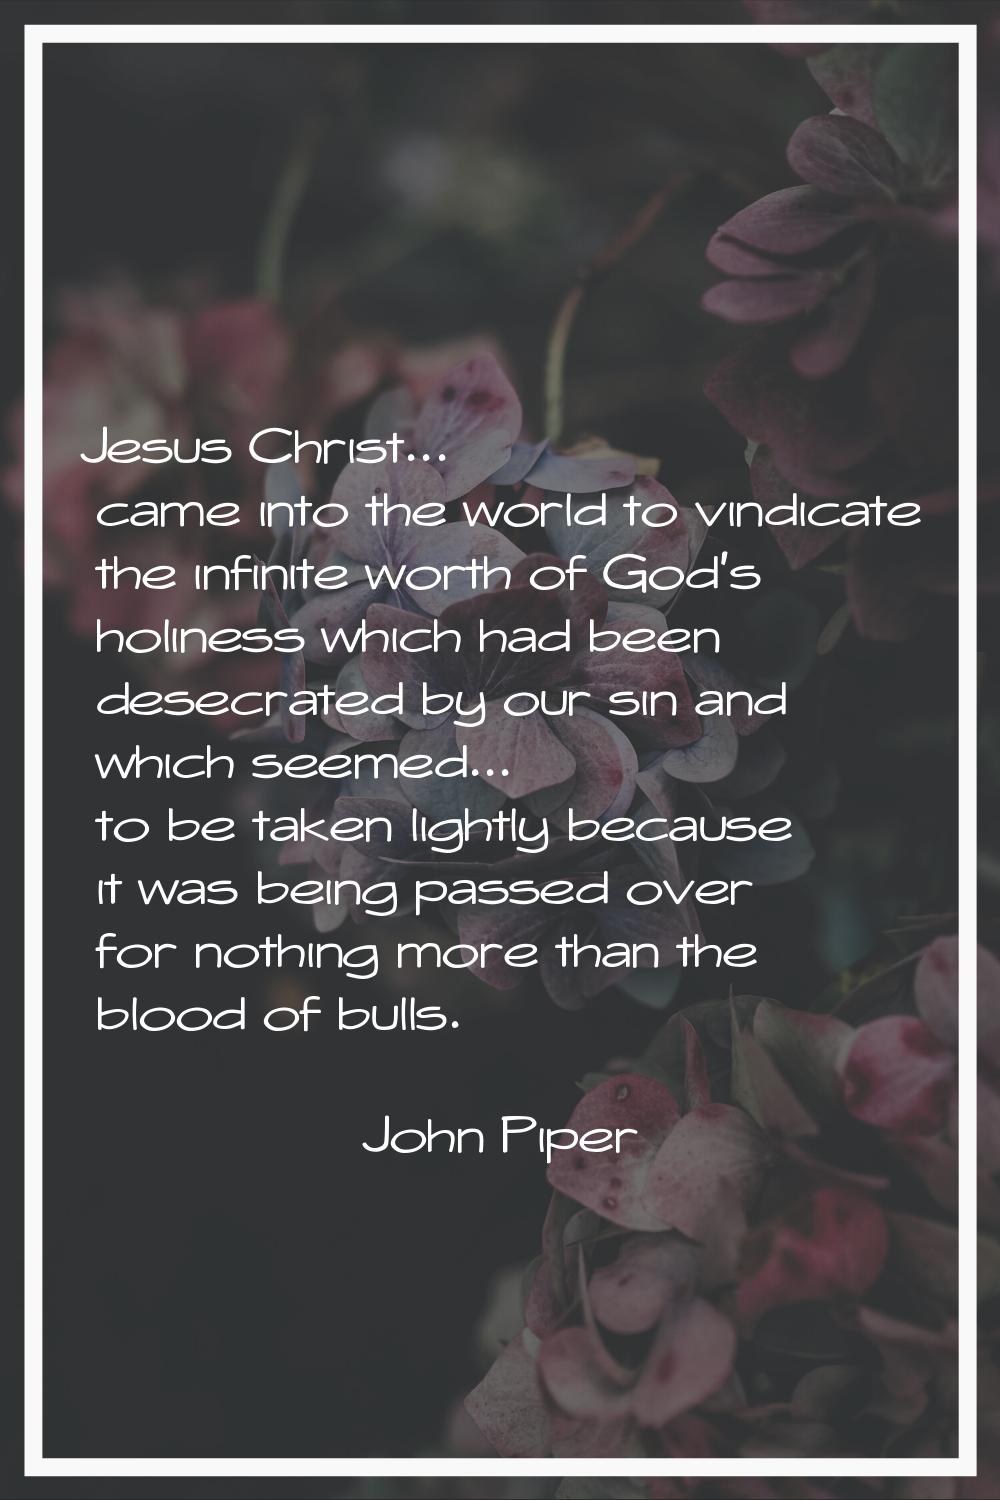 Jesus Christ... came into the world to vindicate the infinite worth of God's holiness which had bee